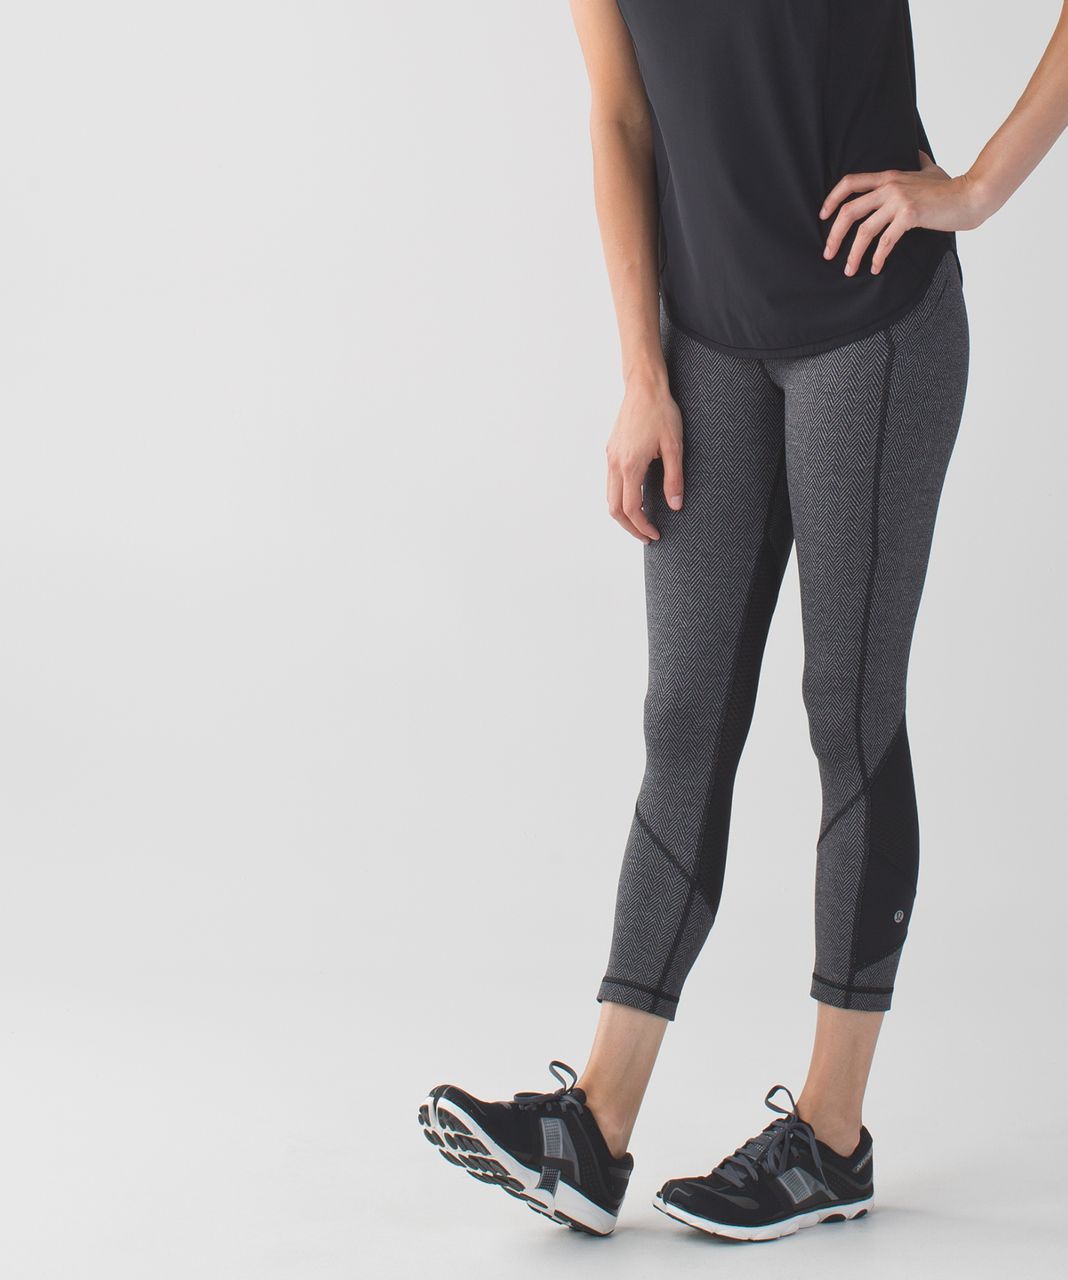 NWT Lululemon Pace Rival HR Crop Legging 22 Size 6 Heathered